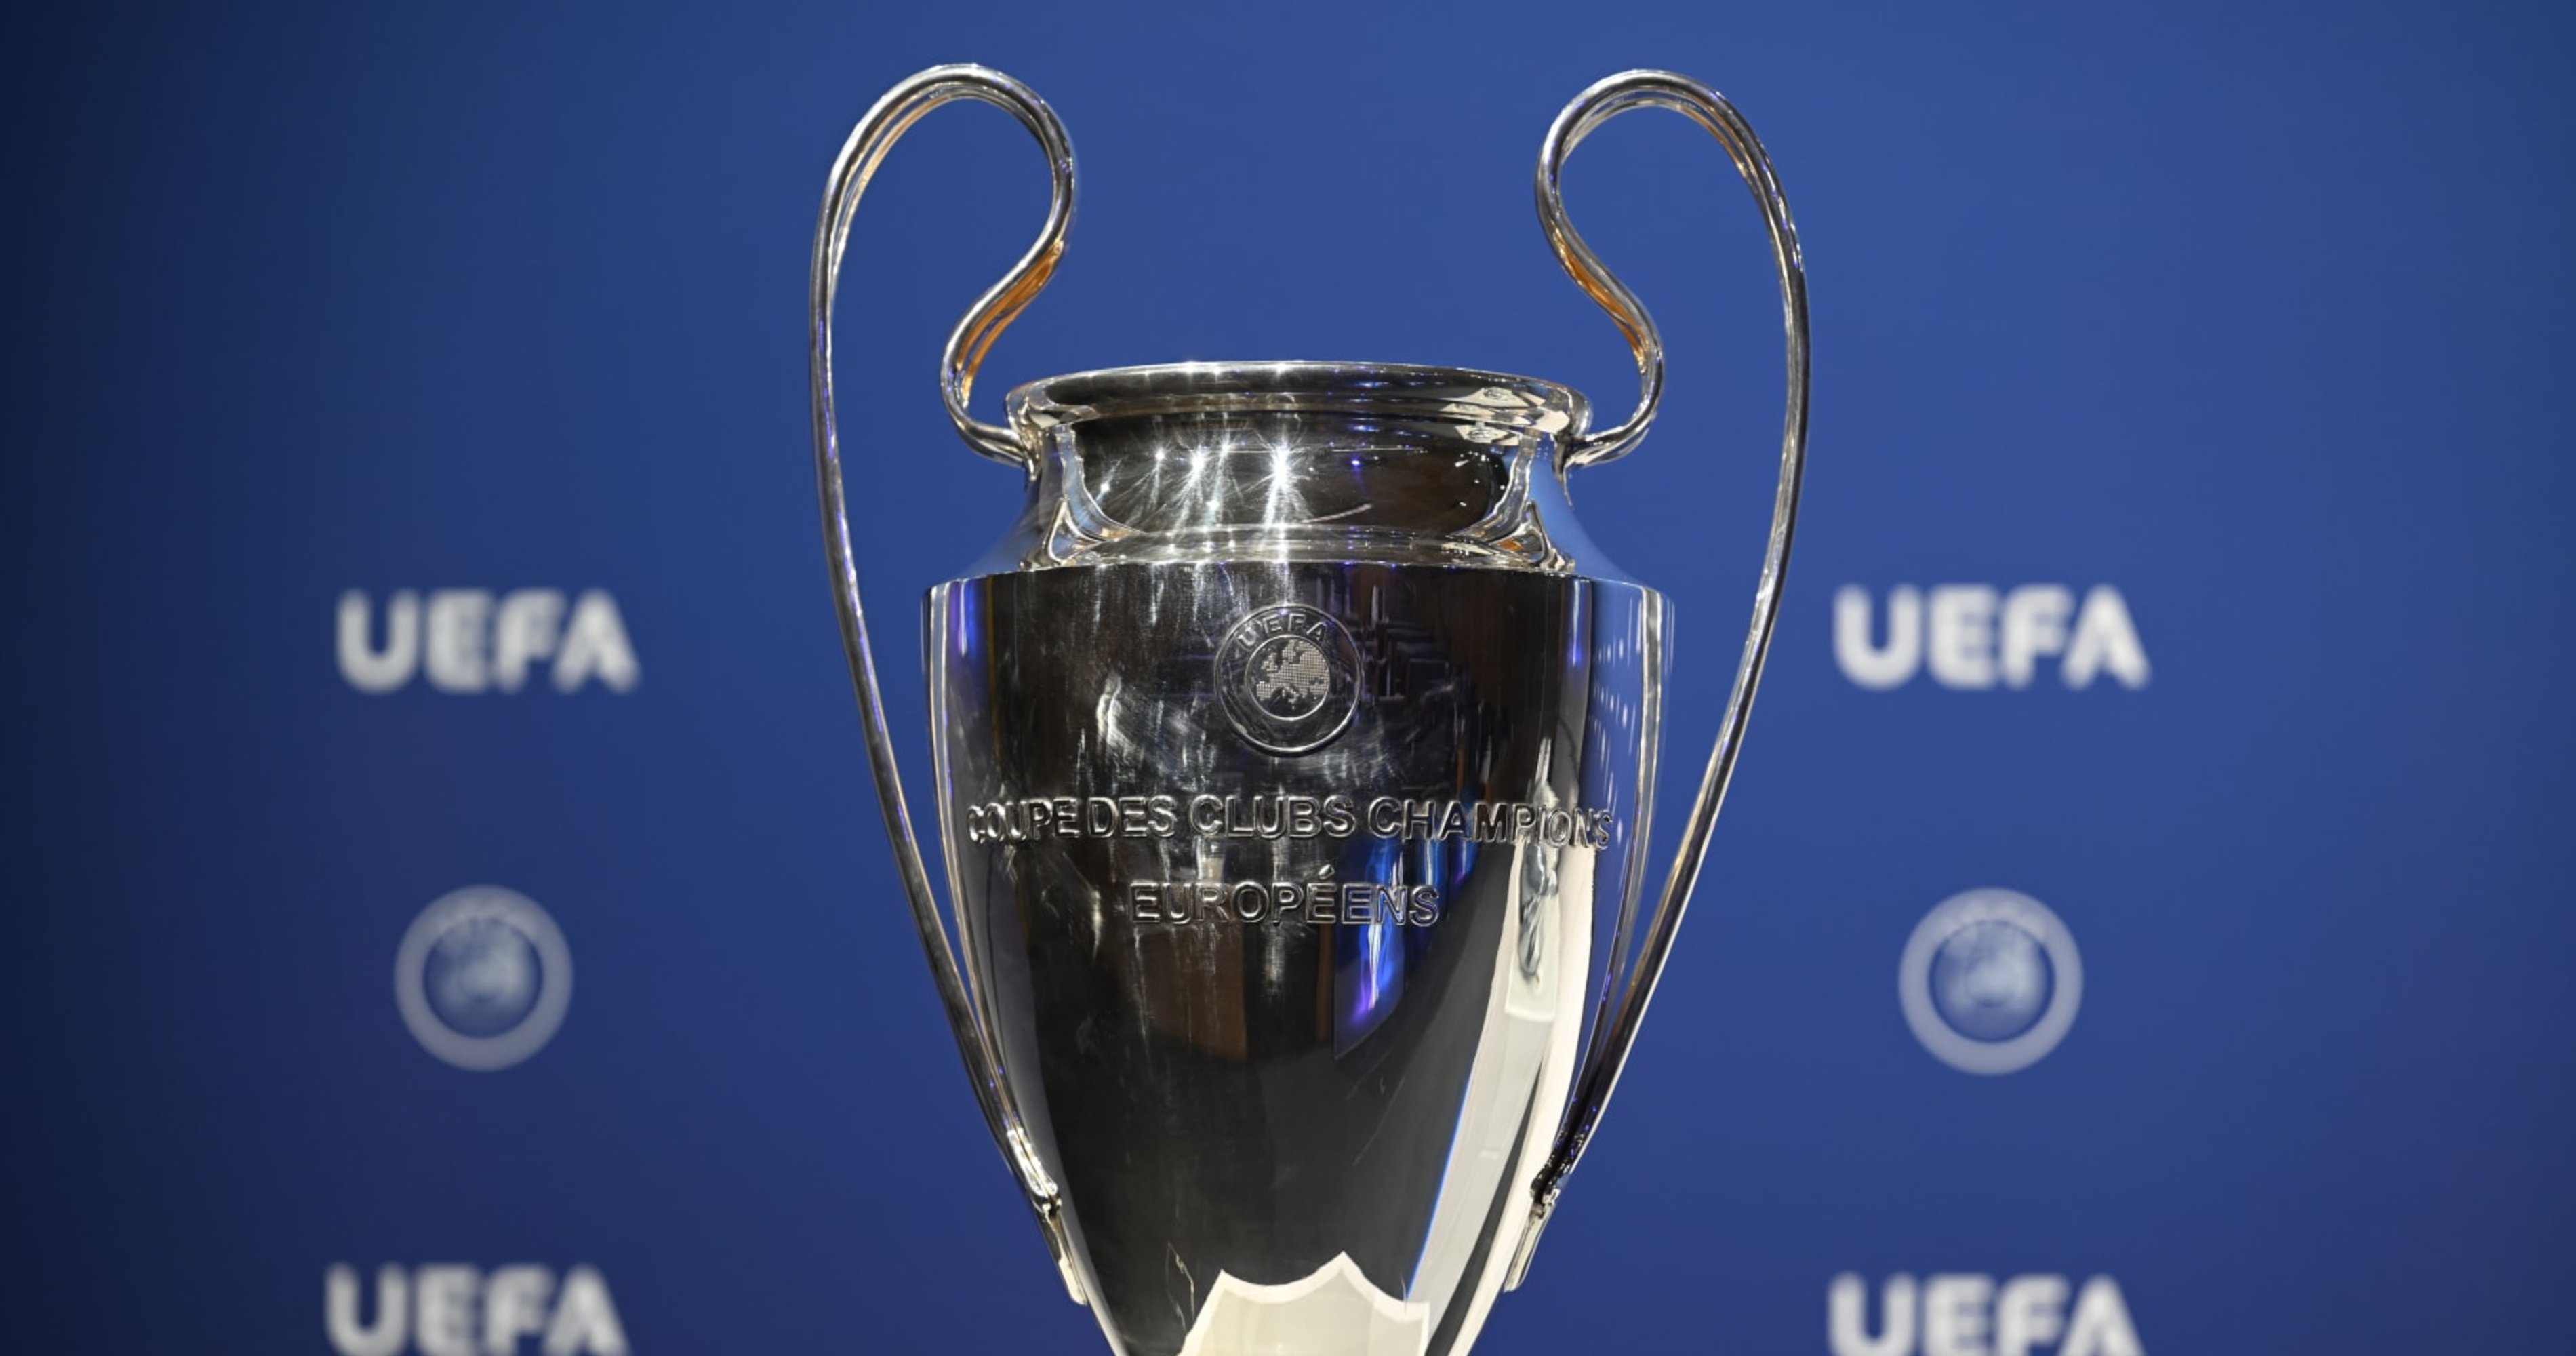 Explained: How the new Champions League will work - The Athletic